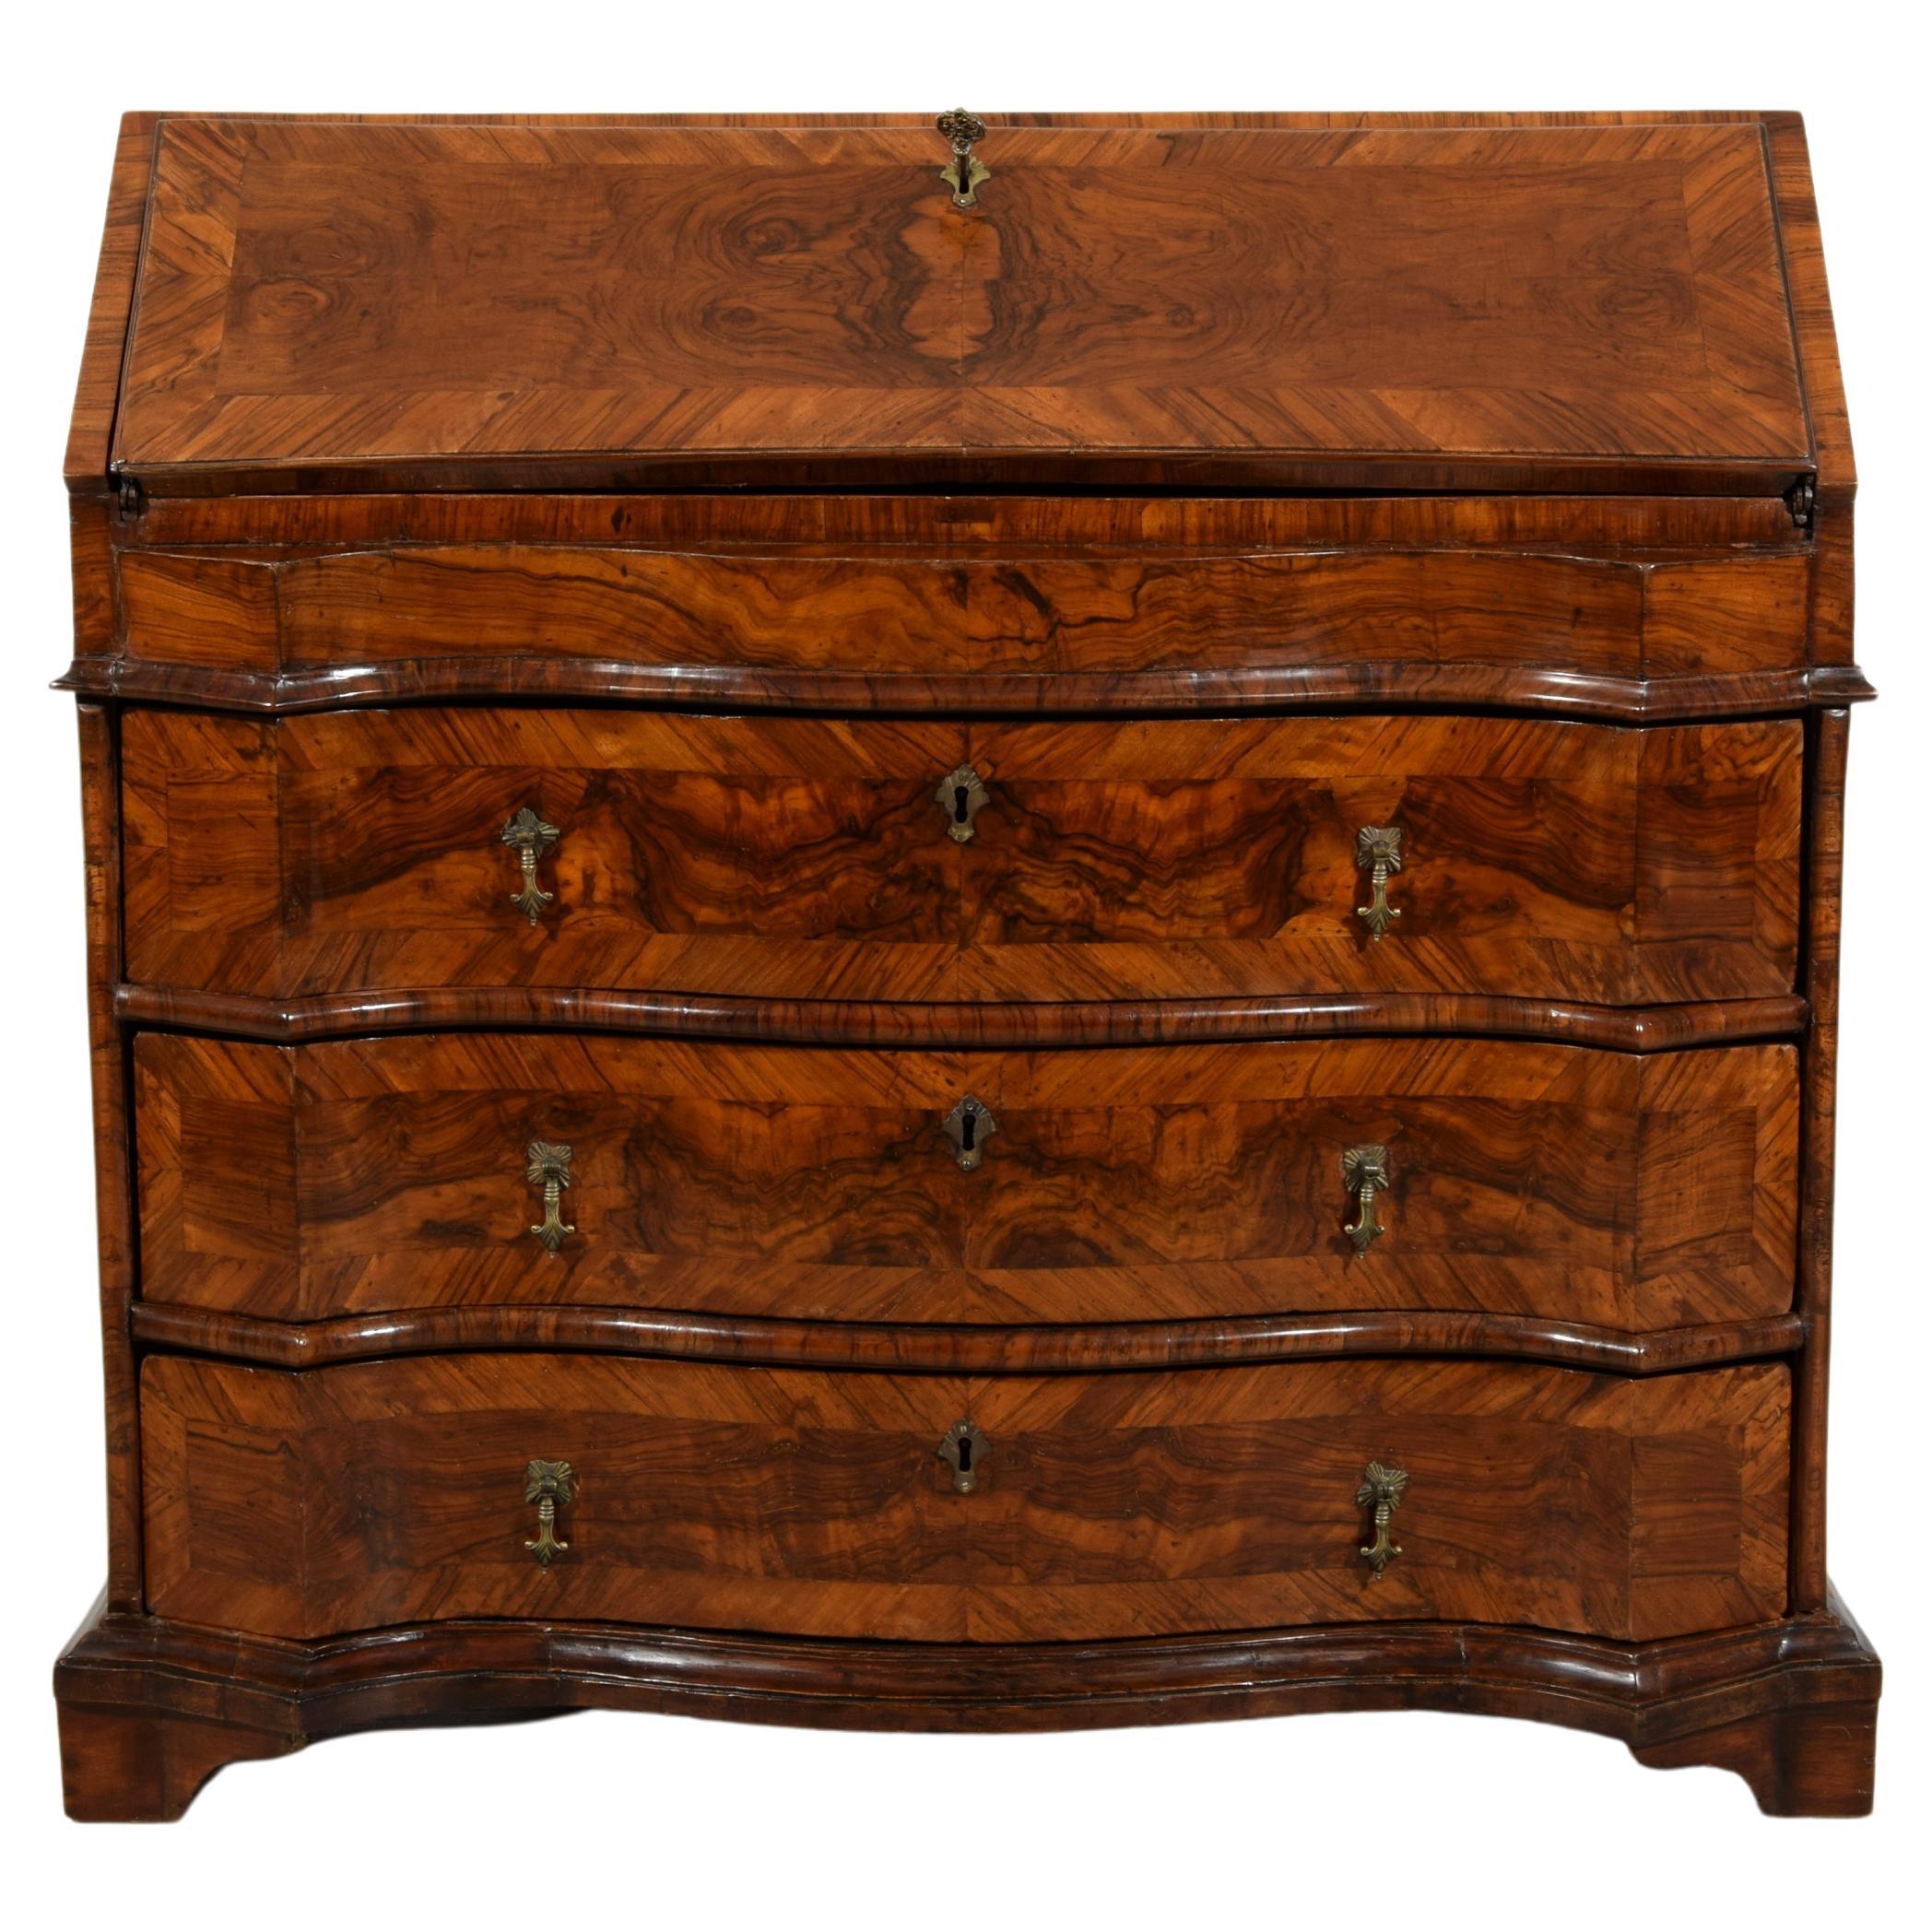 18th Century, Italian Walnut Wood Chest of Drawers with Secrétaire